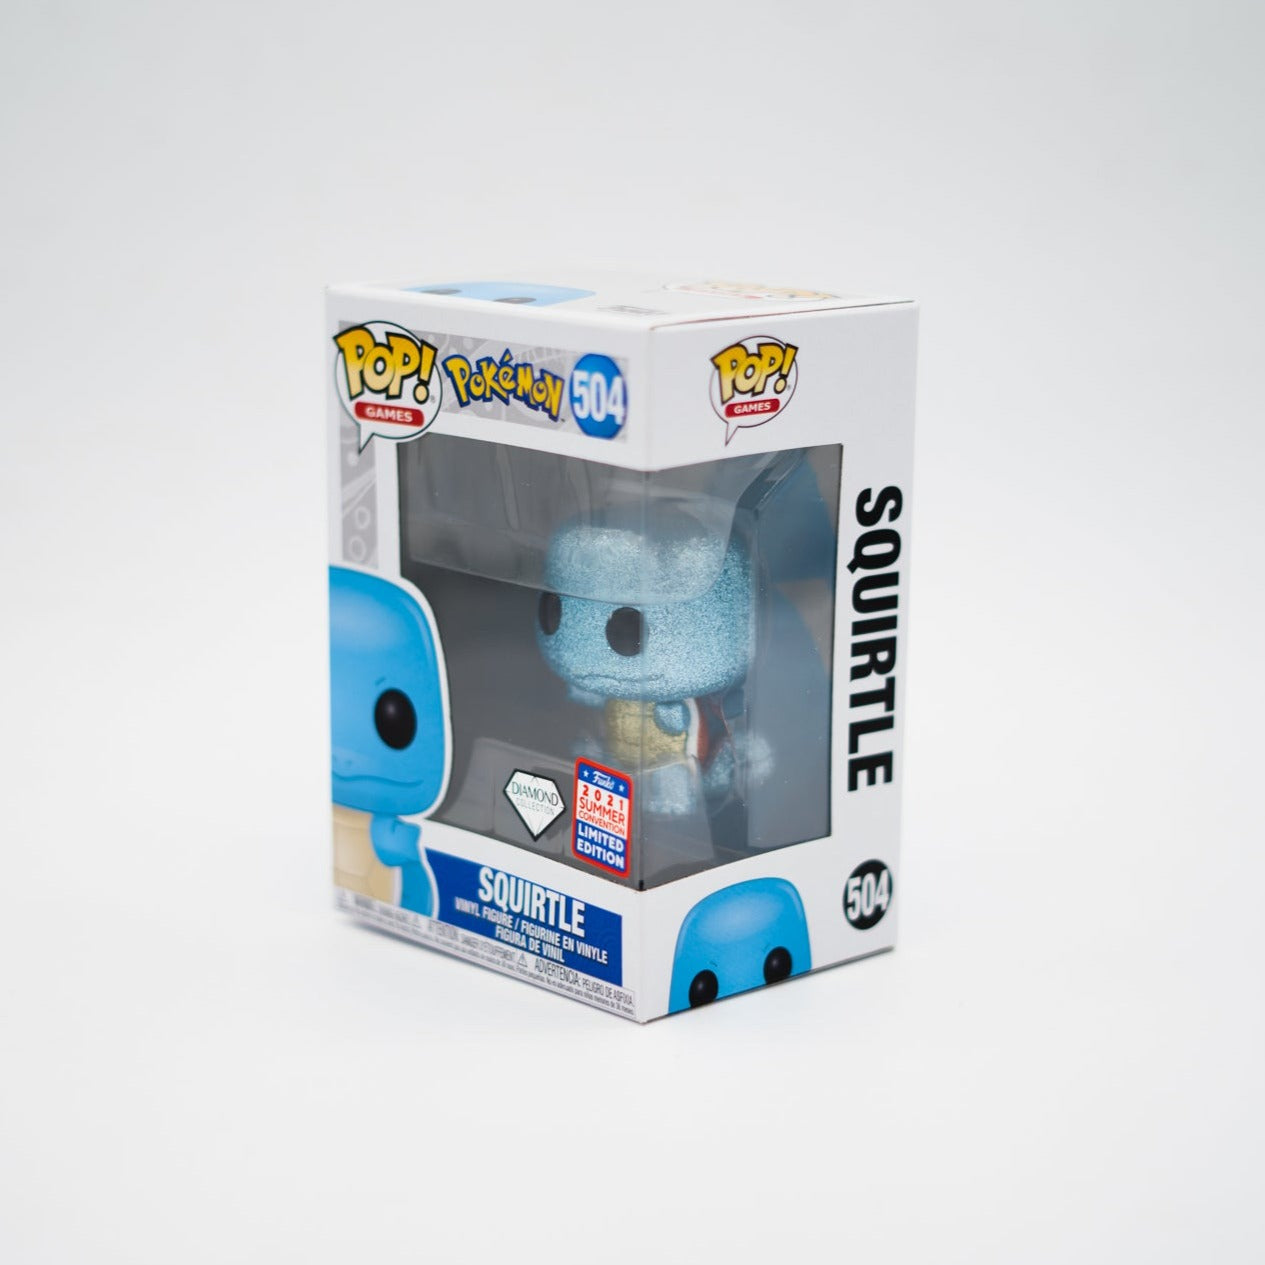 Funko Pop! Squirtle 504 Diamond 2021 Summer Convention Limited Edition